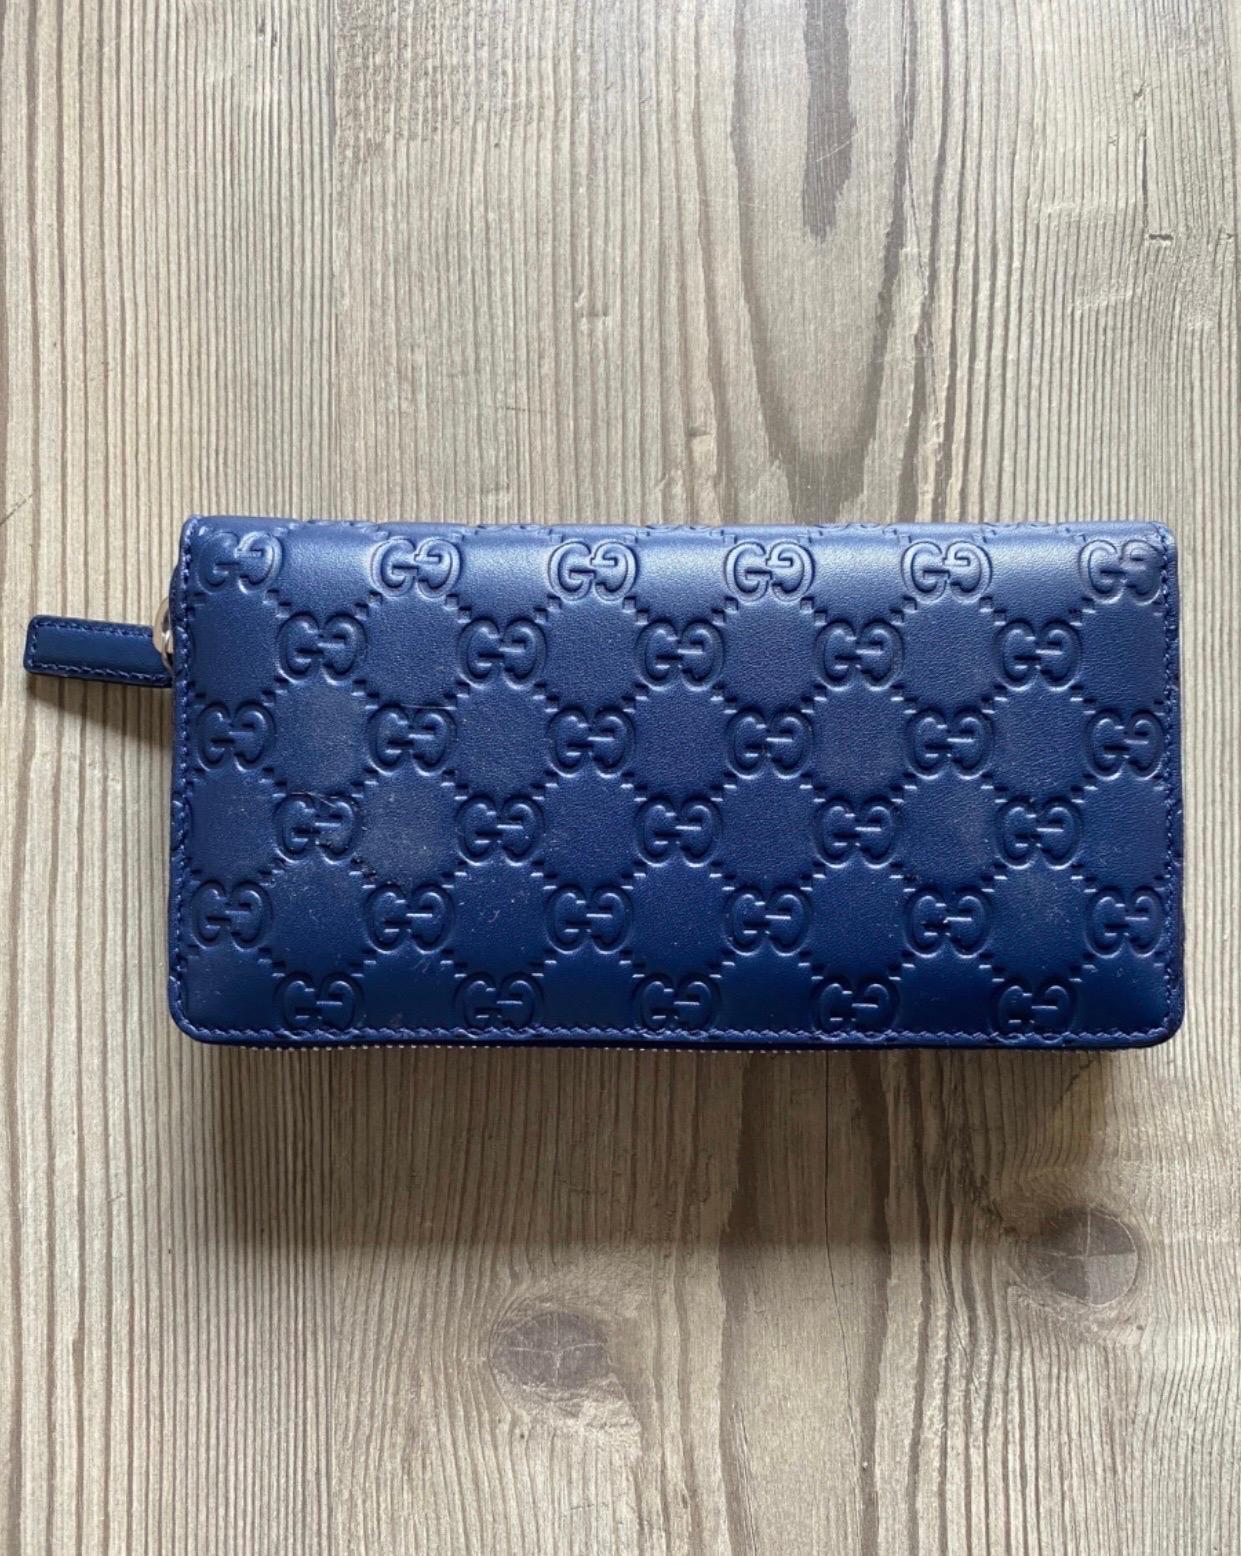 Gucci Zip Around Wallet NY Yankees Patch Royal Blue. new never used with box, dimensions: length 19cm width 11cm height 2.5cm